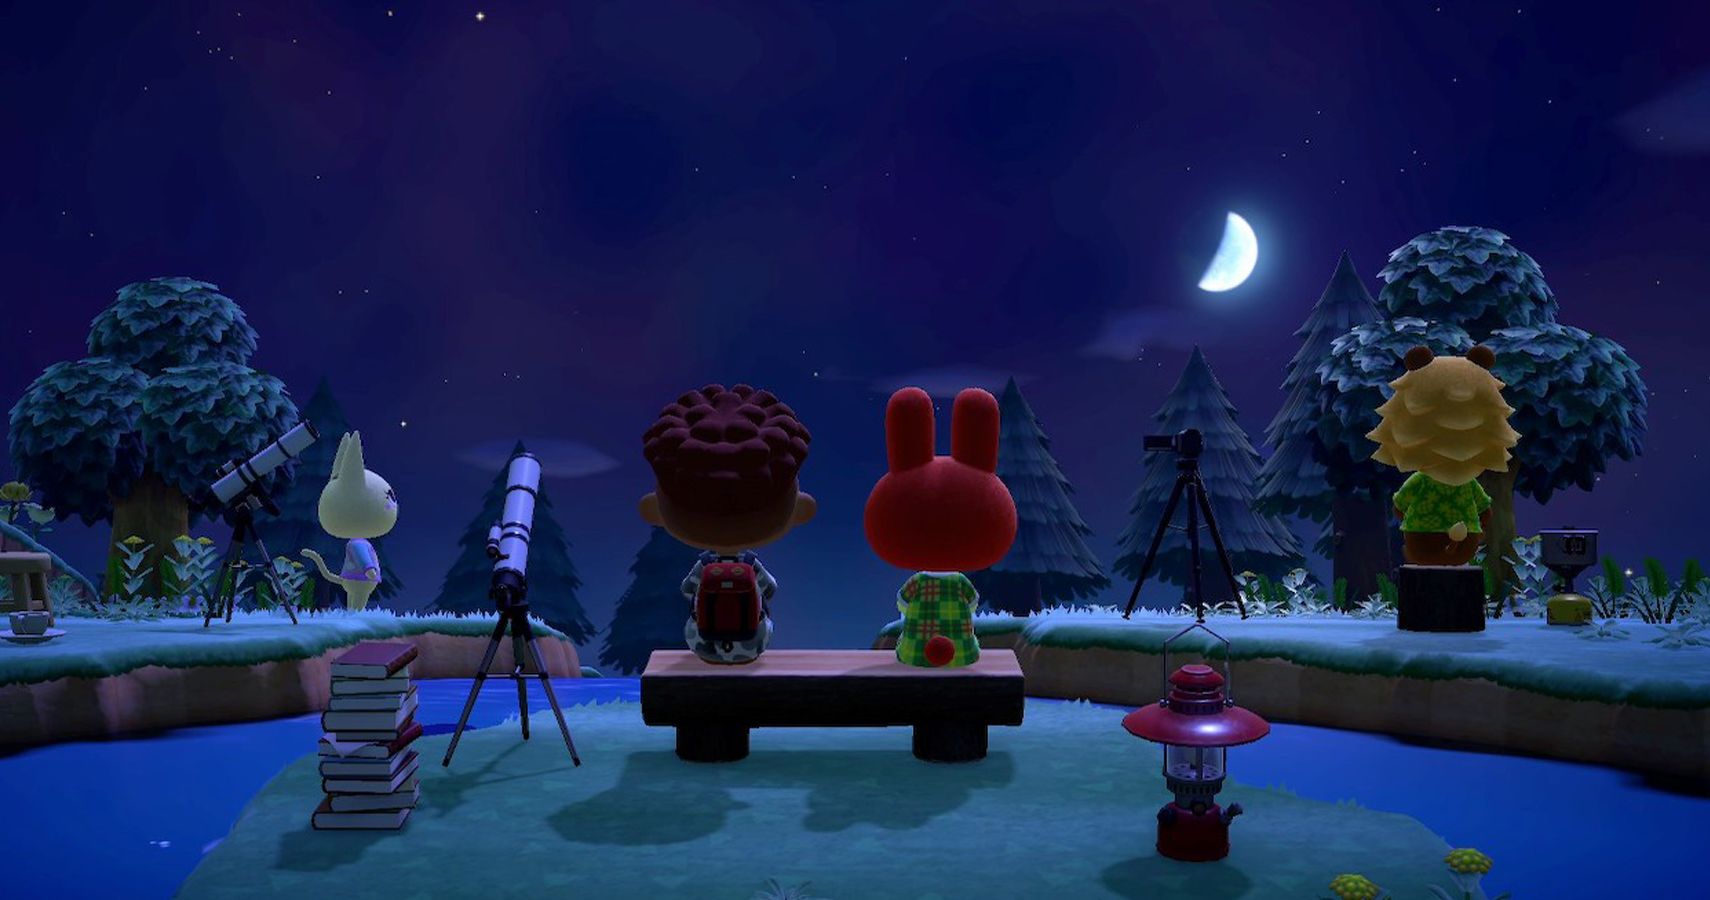 An island dweller sat with a villager watching the sky at night.